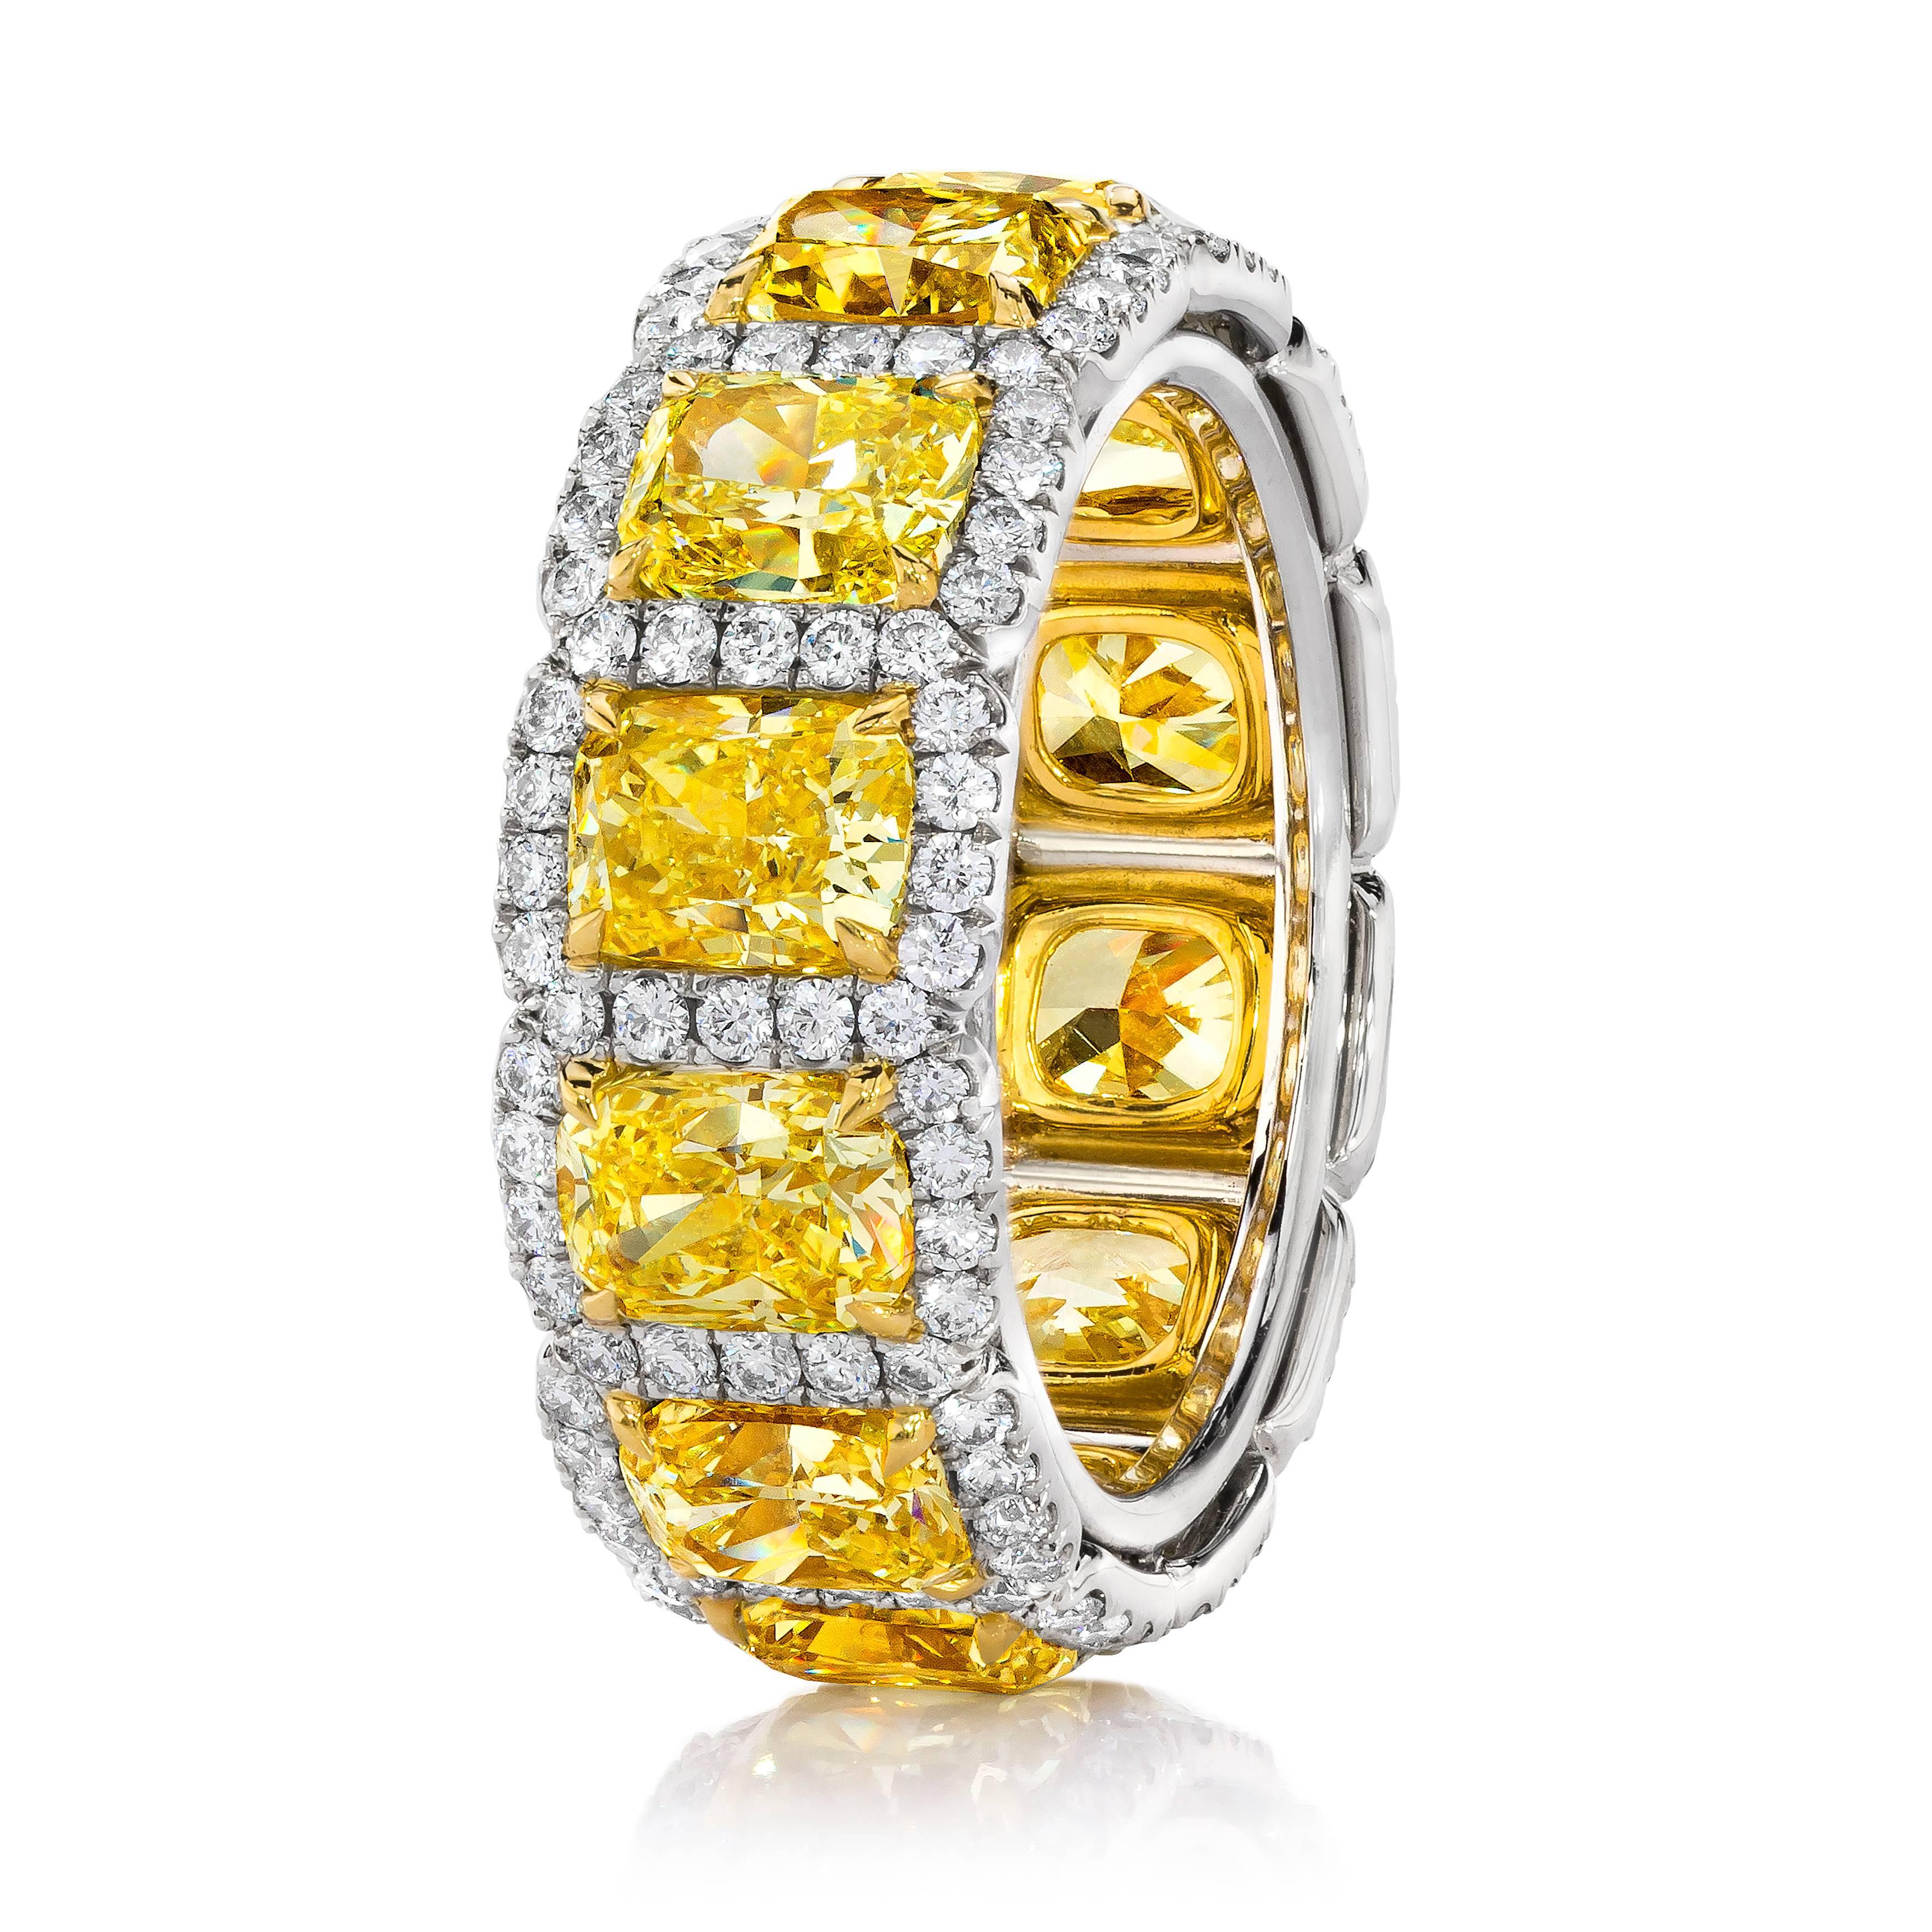 This wedding band features 12 cushion cut diamonds weighing 7.05 carat total. The diamonds are of Fancy Intense Yellow color and VS clarity. Each yellow diamond surrounded by the row of white round brilliant diamonds weighing 1.07 carat total. The